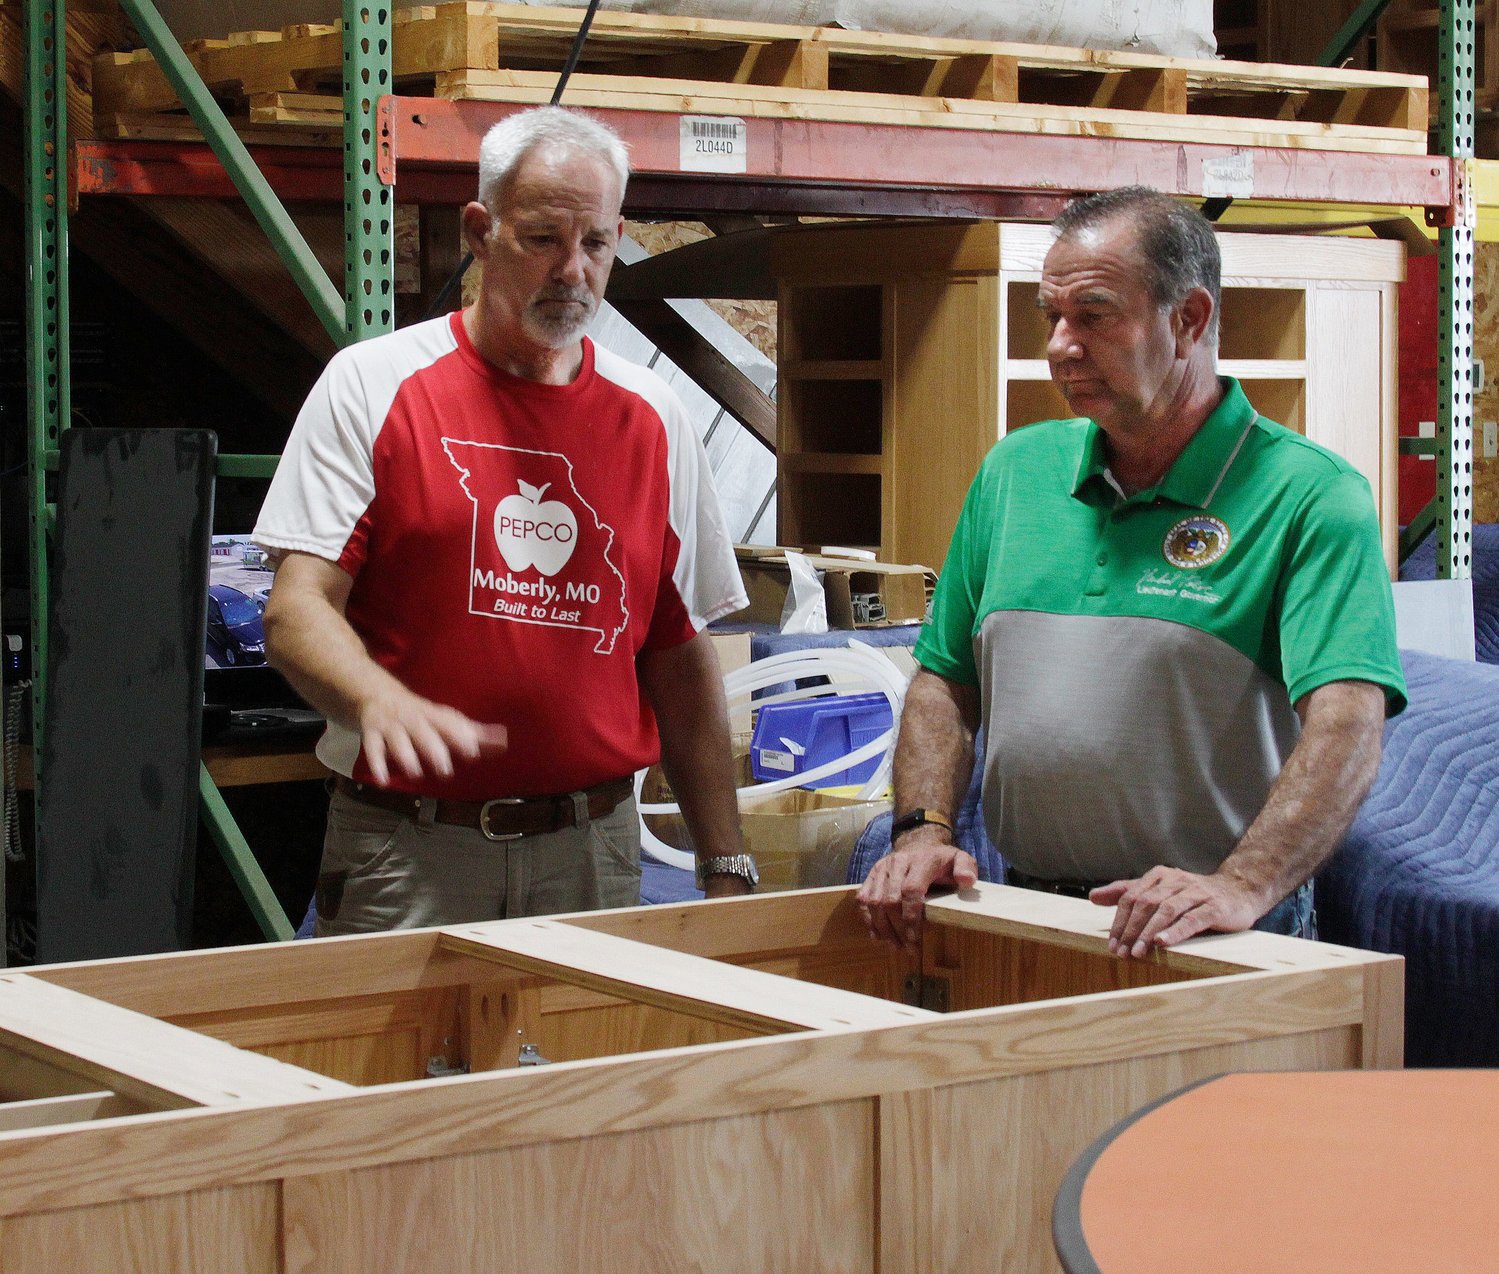 Missouri Lt. Governor Mike Kehoe, left, listens to PEPCO owner Dave Patton explains the process of how his company makes a custom-made classroom lab work table that will be shipped to a school district customer. Kehoe visited PEPCO ( Patton Educational Products Co.) on Tuesday, July 27 to learn more about its business operation and because the business is one of about 450 members of the state's Buy Missouri program.